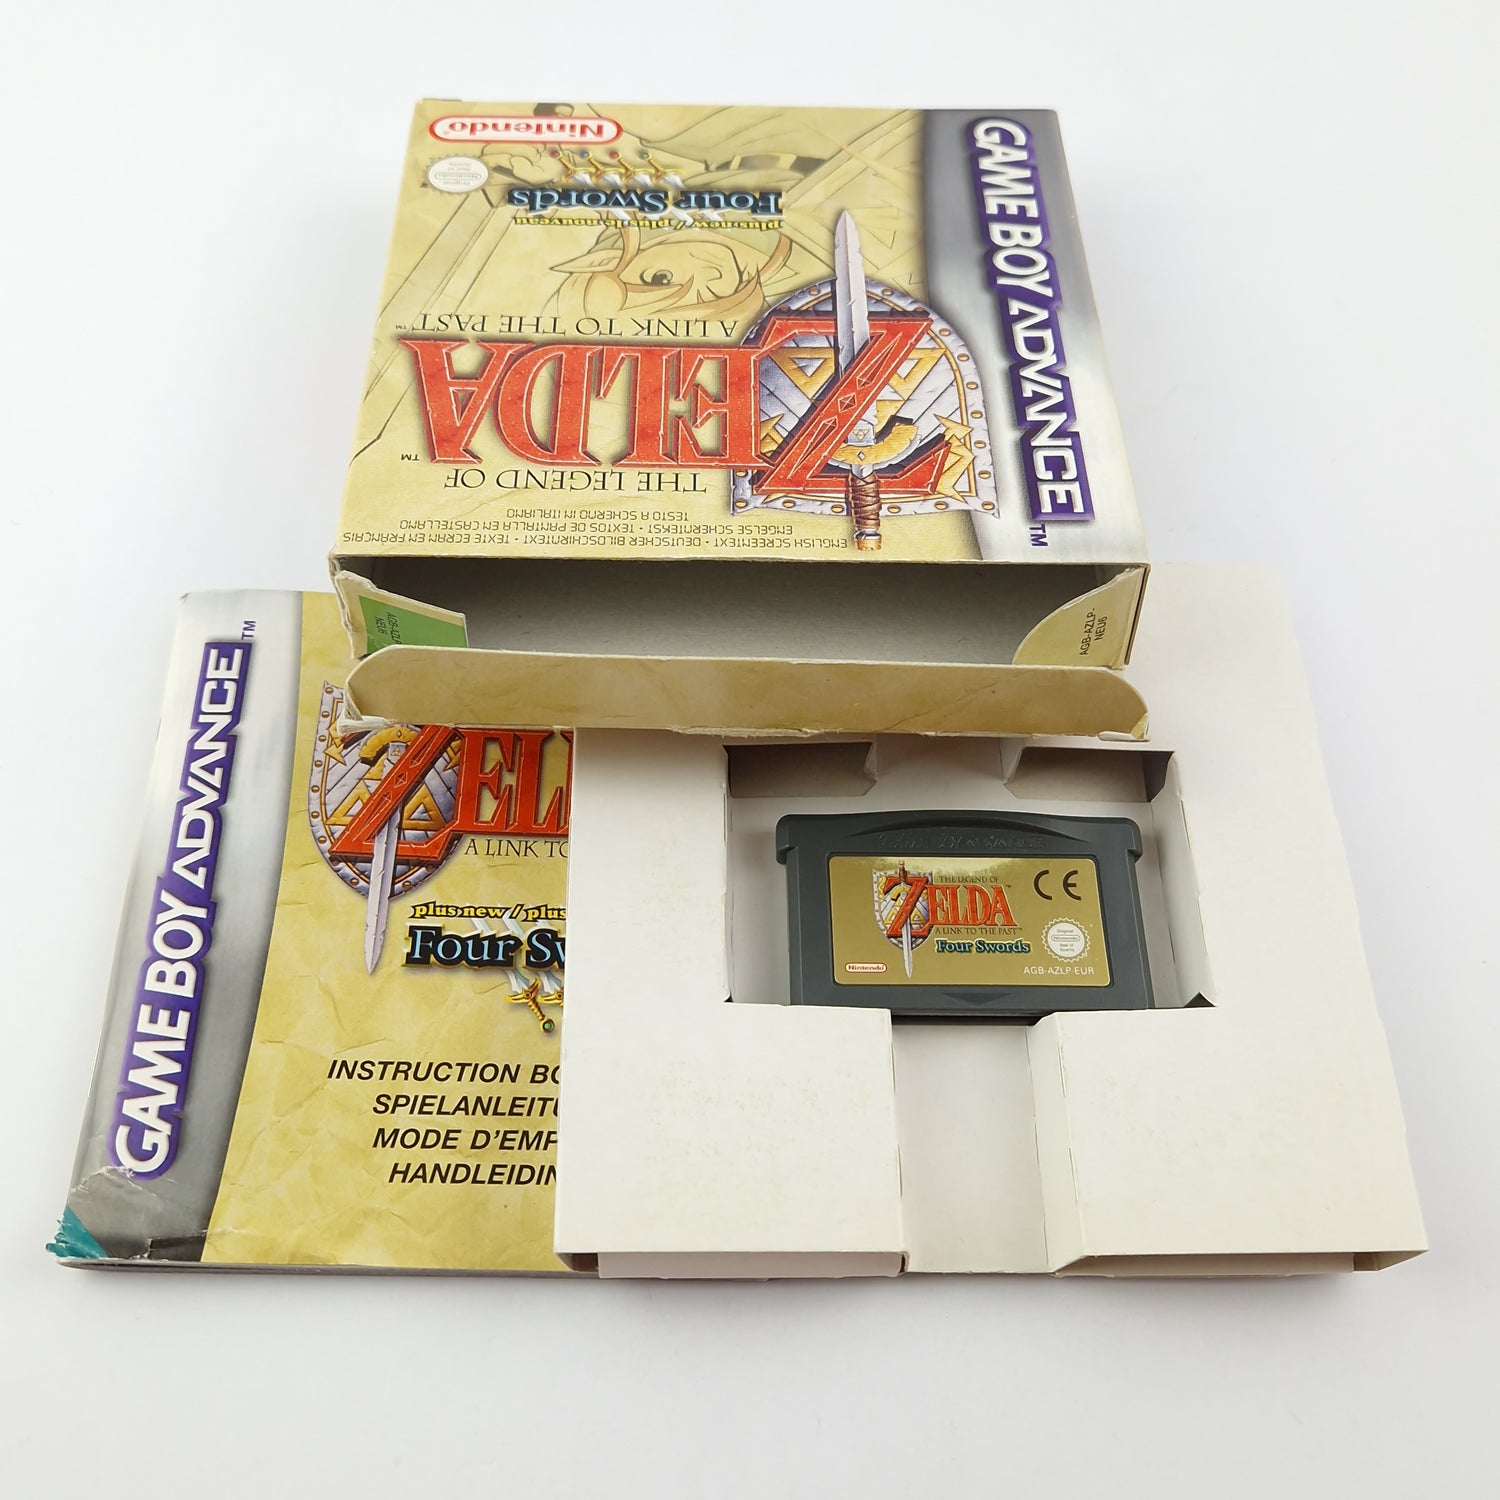 Nintendo Game Boy Advance game: The Legend of Zelda a link to the Past - original packaging